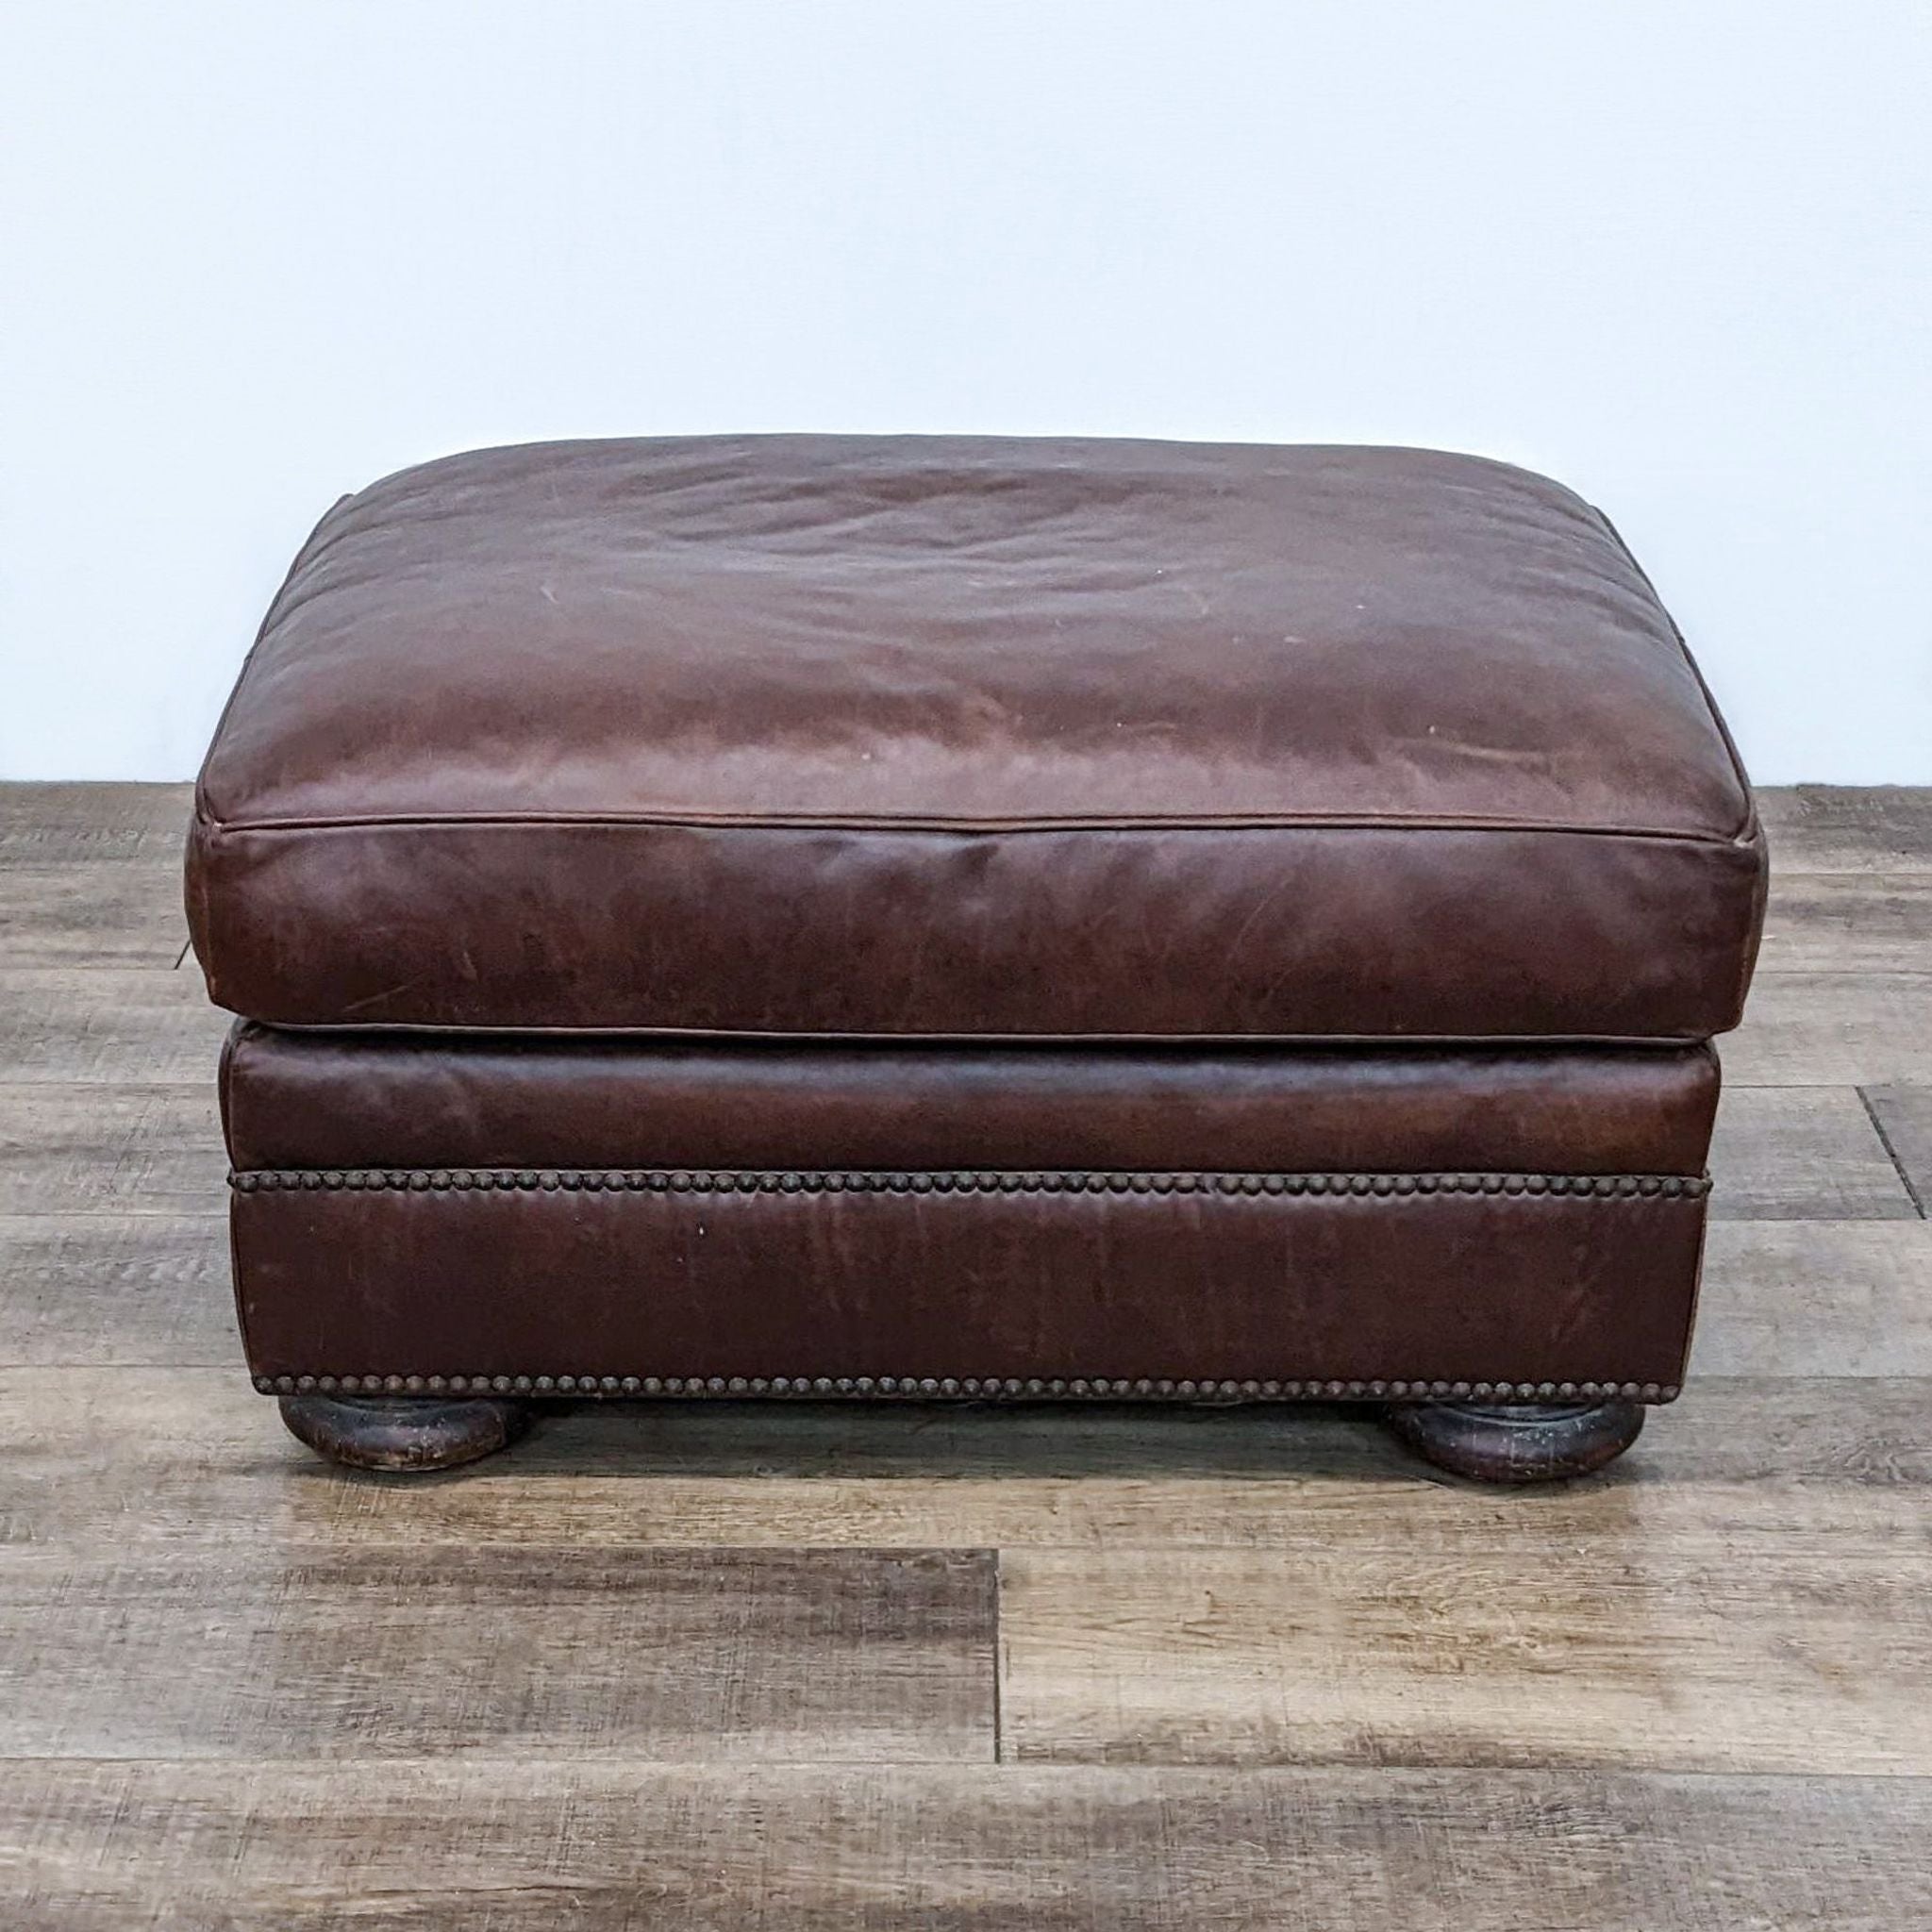 Henredon Leather Co. brown leather ottoman with nail head details and wooden bun feet on a wooden floor.